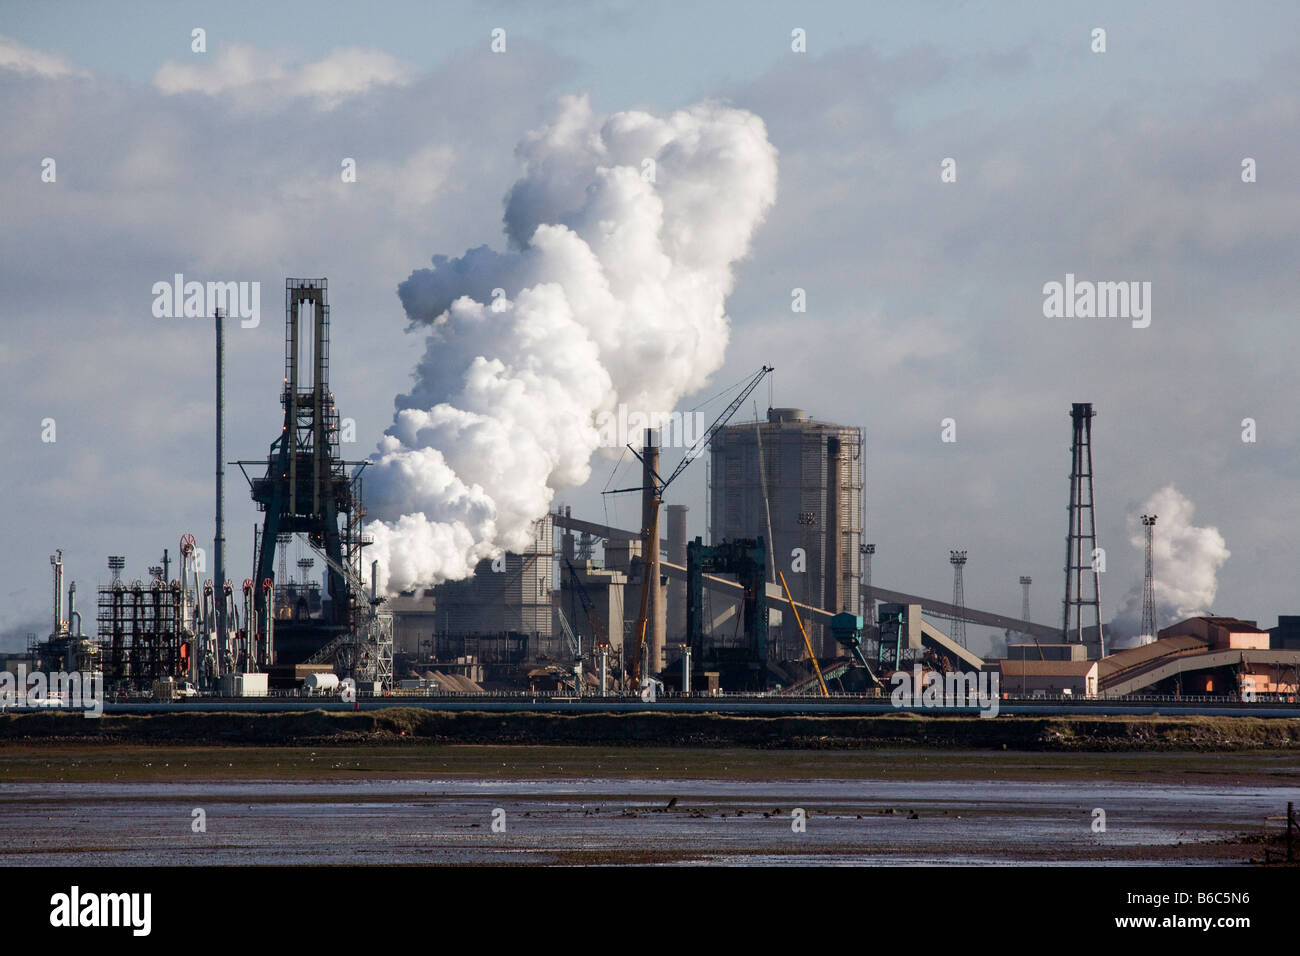 British Steel Industry Plant industrial site Coke Ovens. Steelworks emitting steam plume at Middlesbrough, Redcar, Teesside, North Yorkshire UK Stock Photo